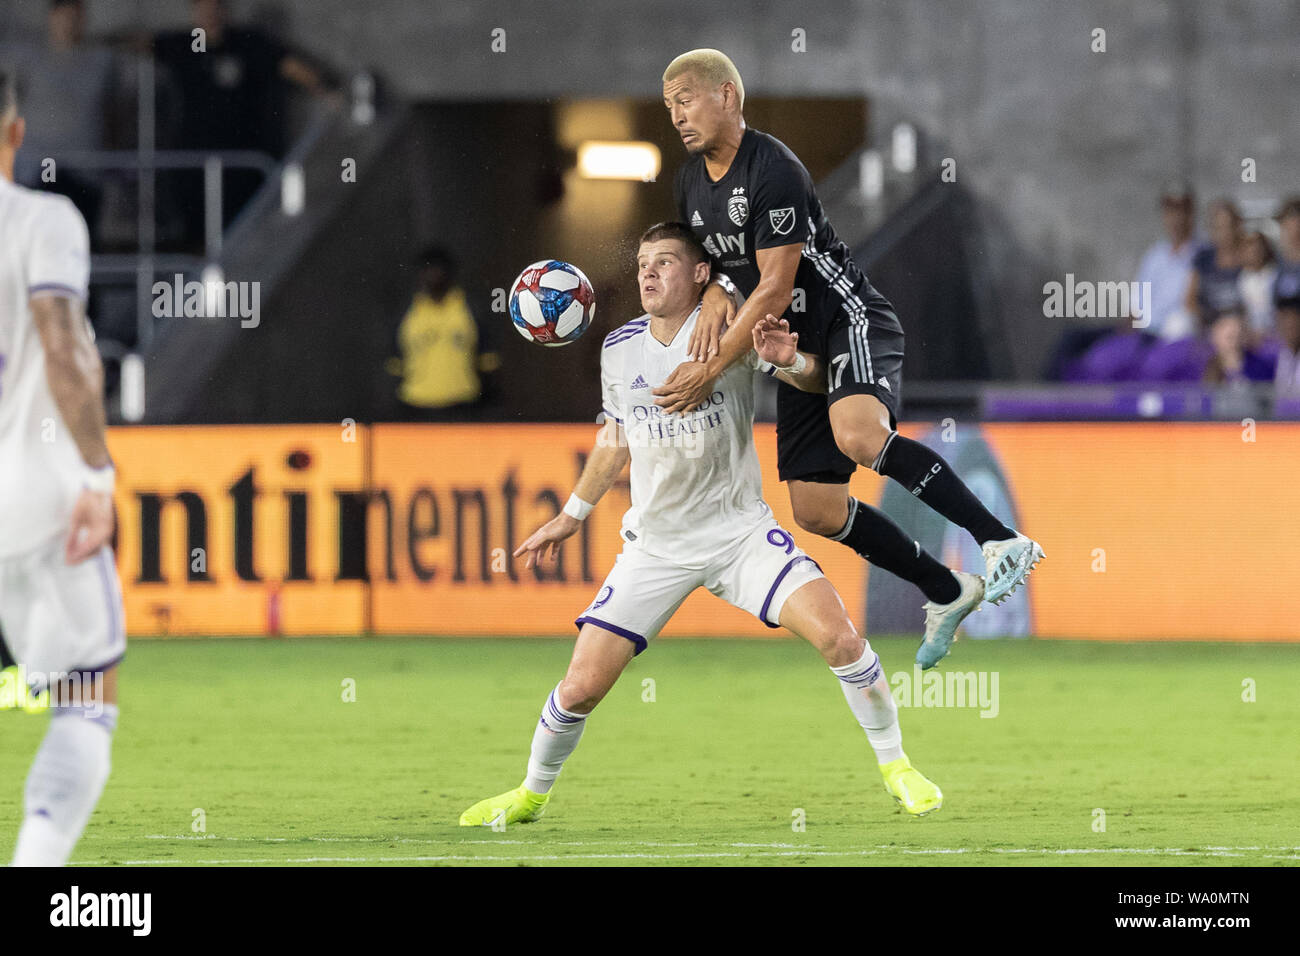 Orlando, Florida, U.S.A. 14th Aug, 2019. Orlando City forward CHRIS MUELLER (9) in action against Sporting Kansas City midfielder ROGER ESPINOZA (17) during the MLS game against Sporting Kansas City at Exploria Stadium in Orlando, Florida. Credit: Cory Knowlton/ZUMA Wire/Alamy Live News Stock Photo